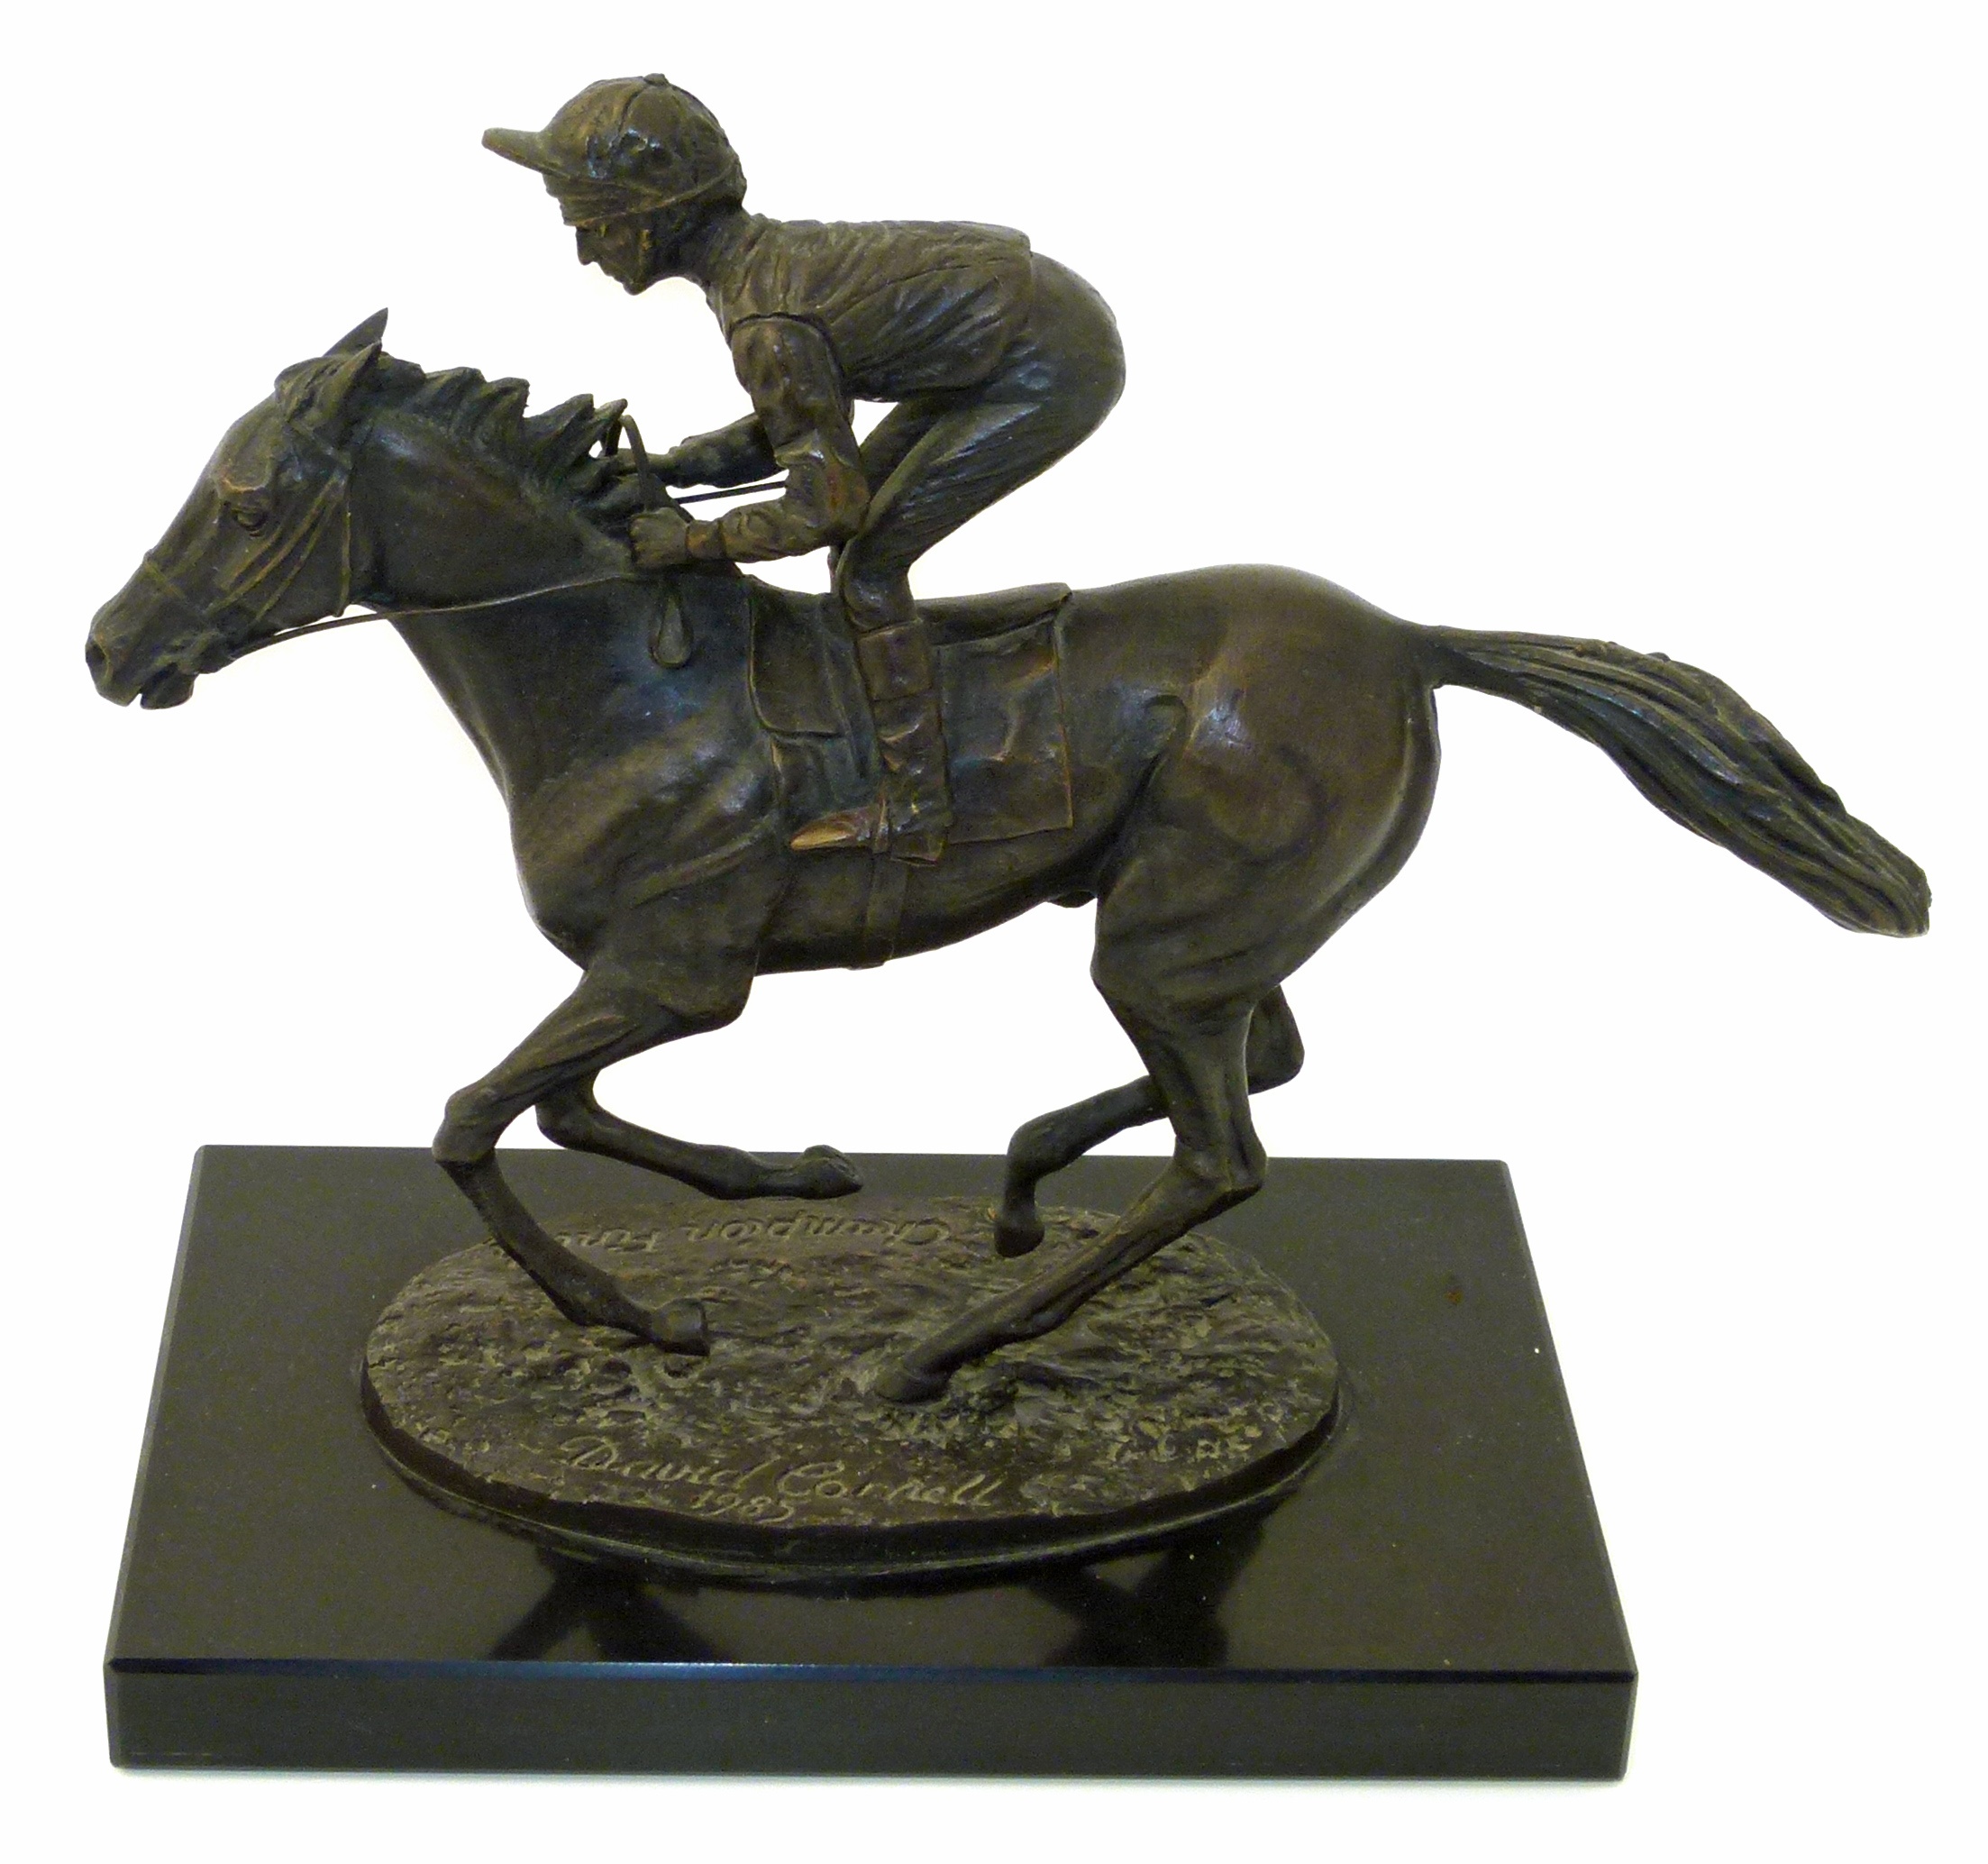 David Cornell, "Champion Finish", Bronze sculpture on marble base, signed and dated 1985, made to